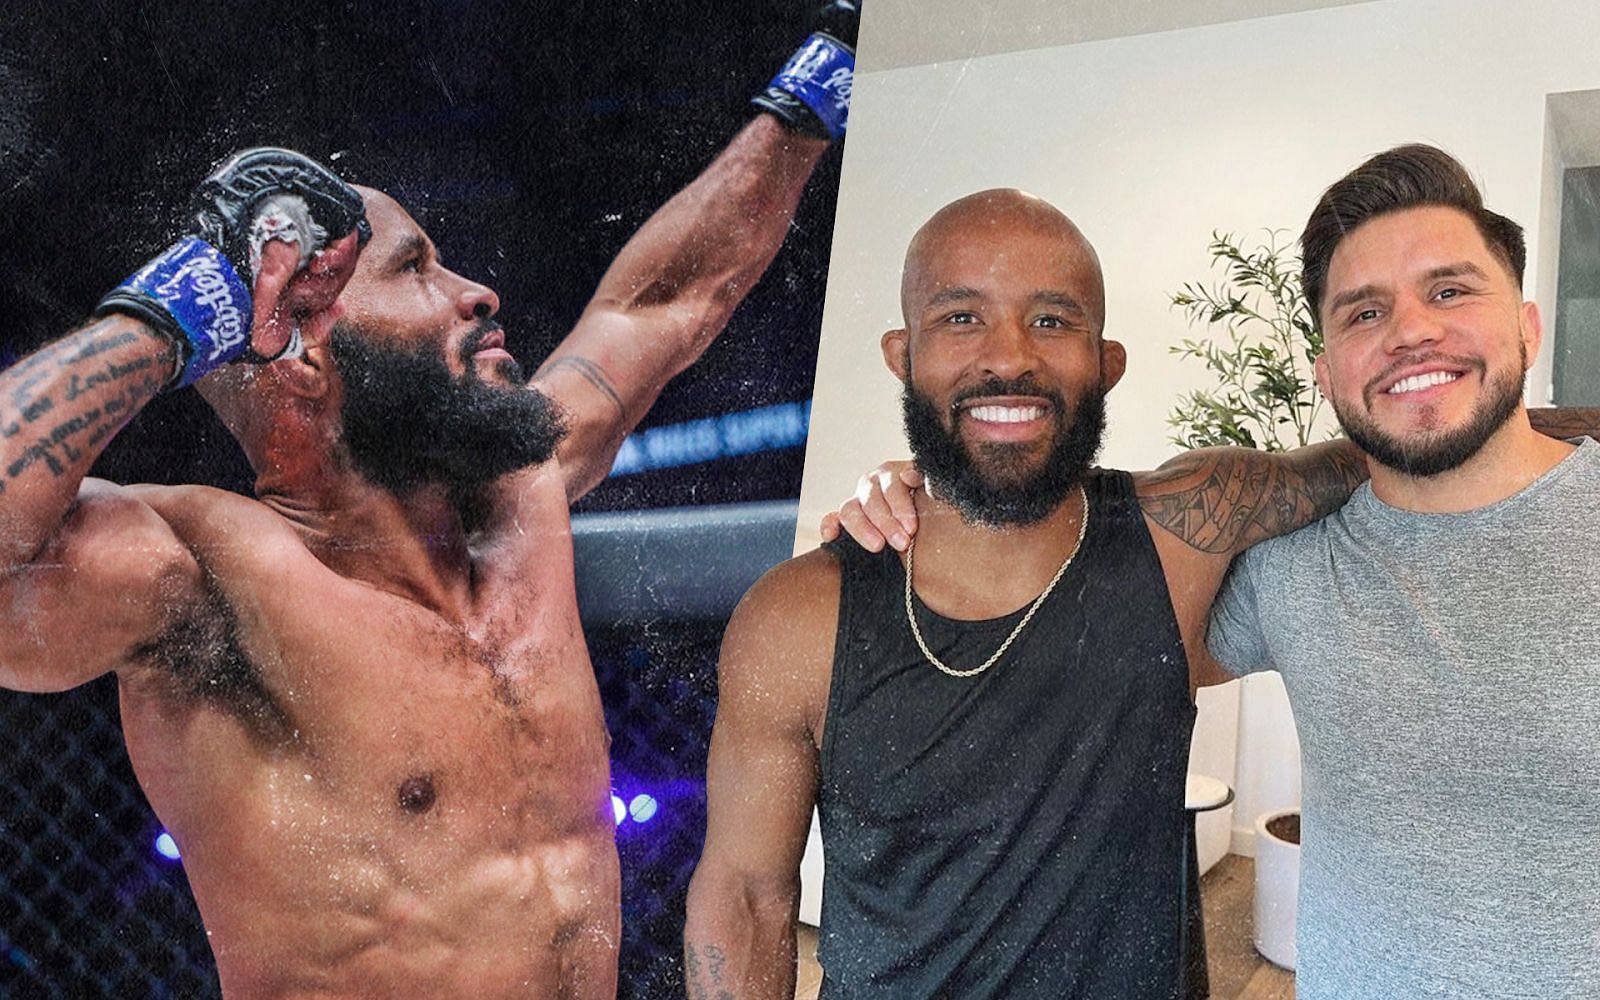 “It only makes sense” - Demetrious Johnson on Henry Cejudo preparing him for Adriano Moraes rematch